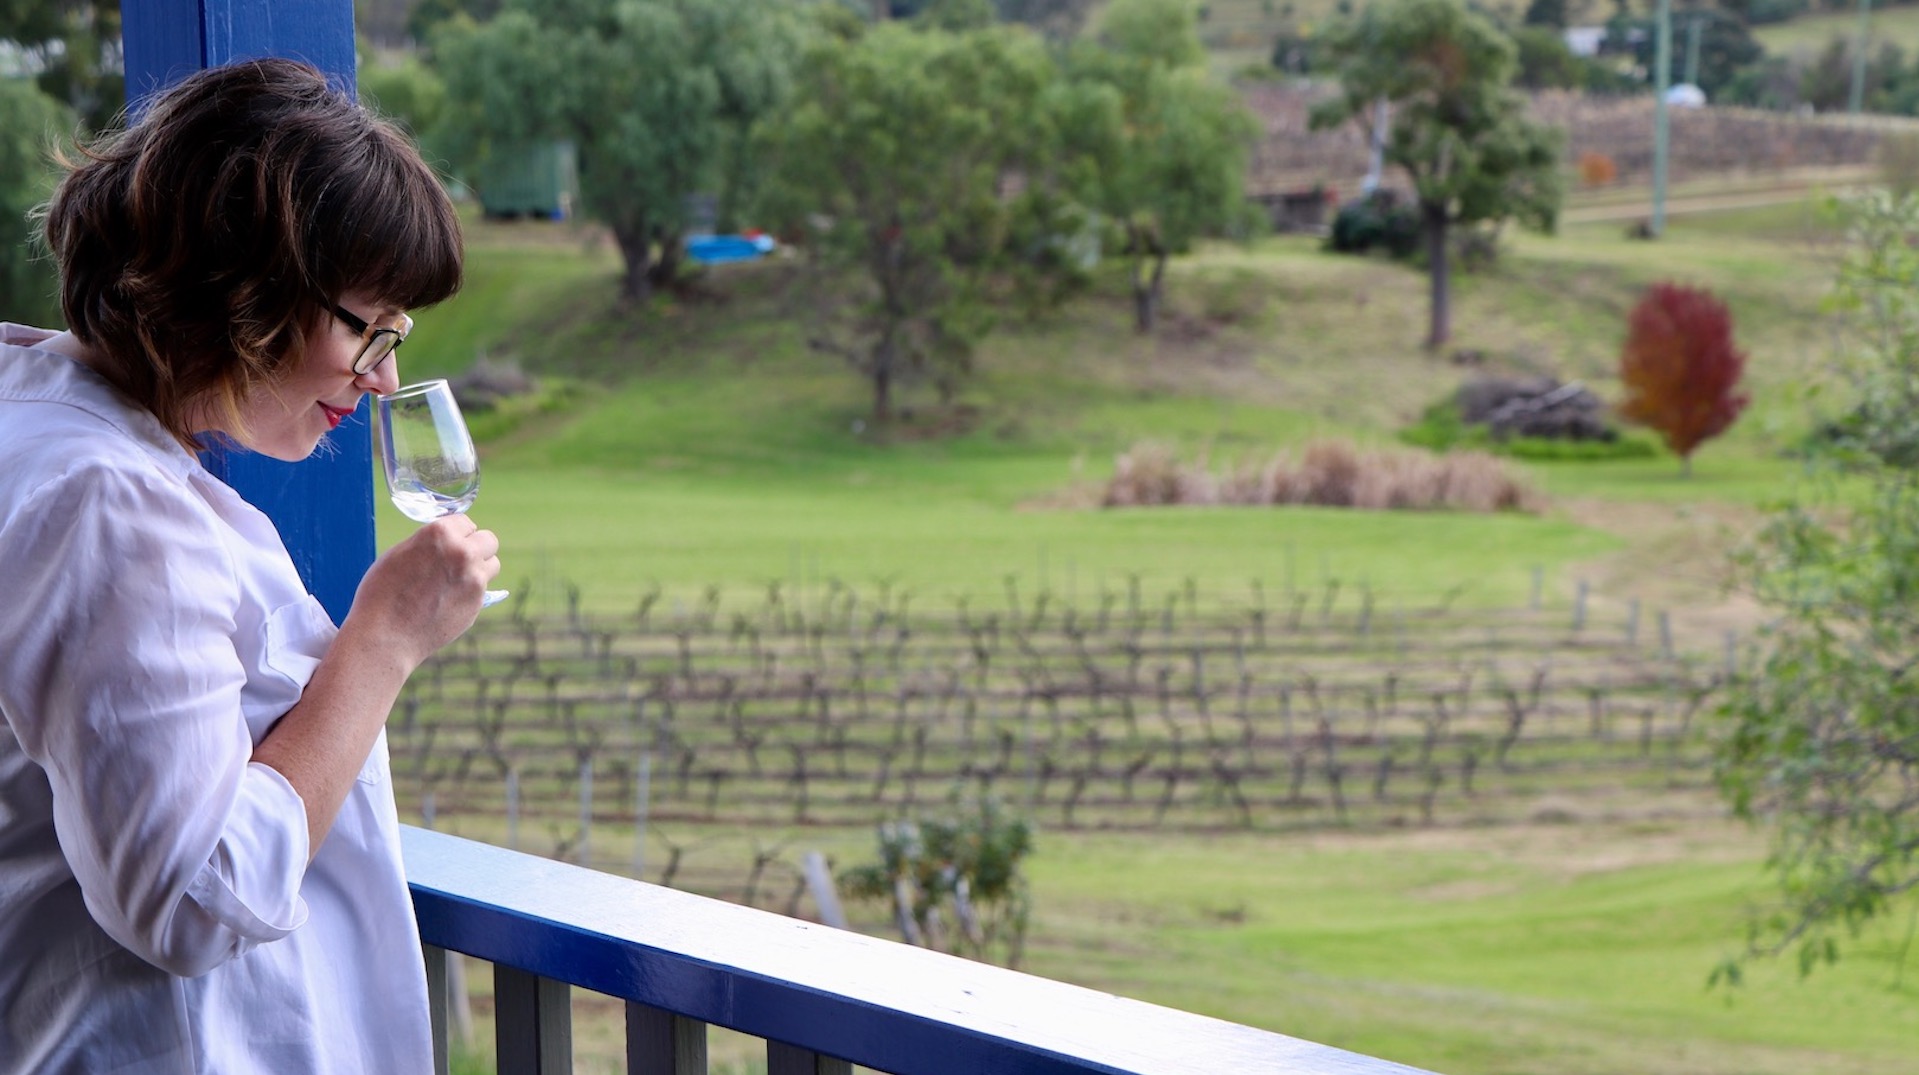 Private Boutique Hunter Valley Winery Tour Full Day 4-7 people includes Two Course Delicious Lunch